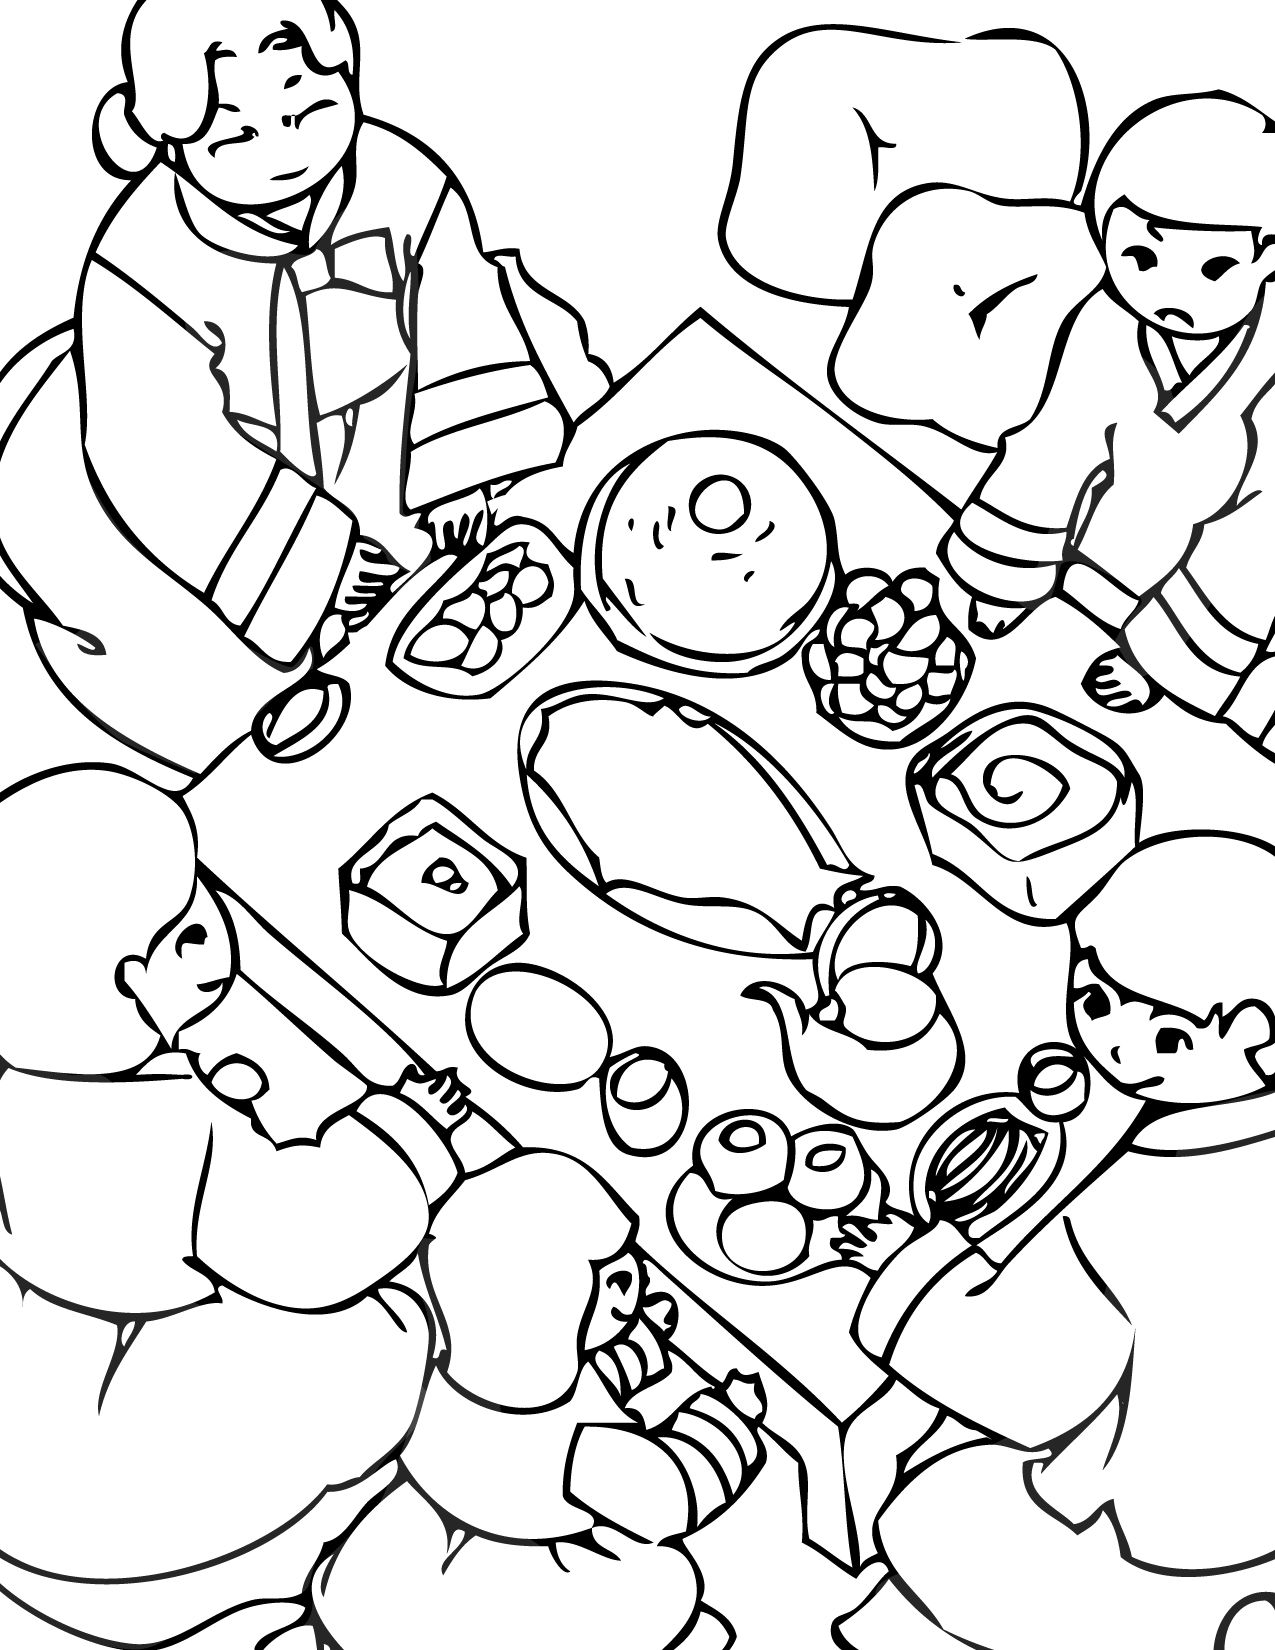 Korea Coloring Pages - Coloring Home